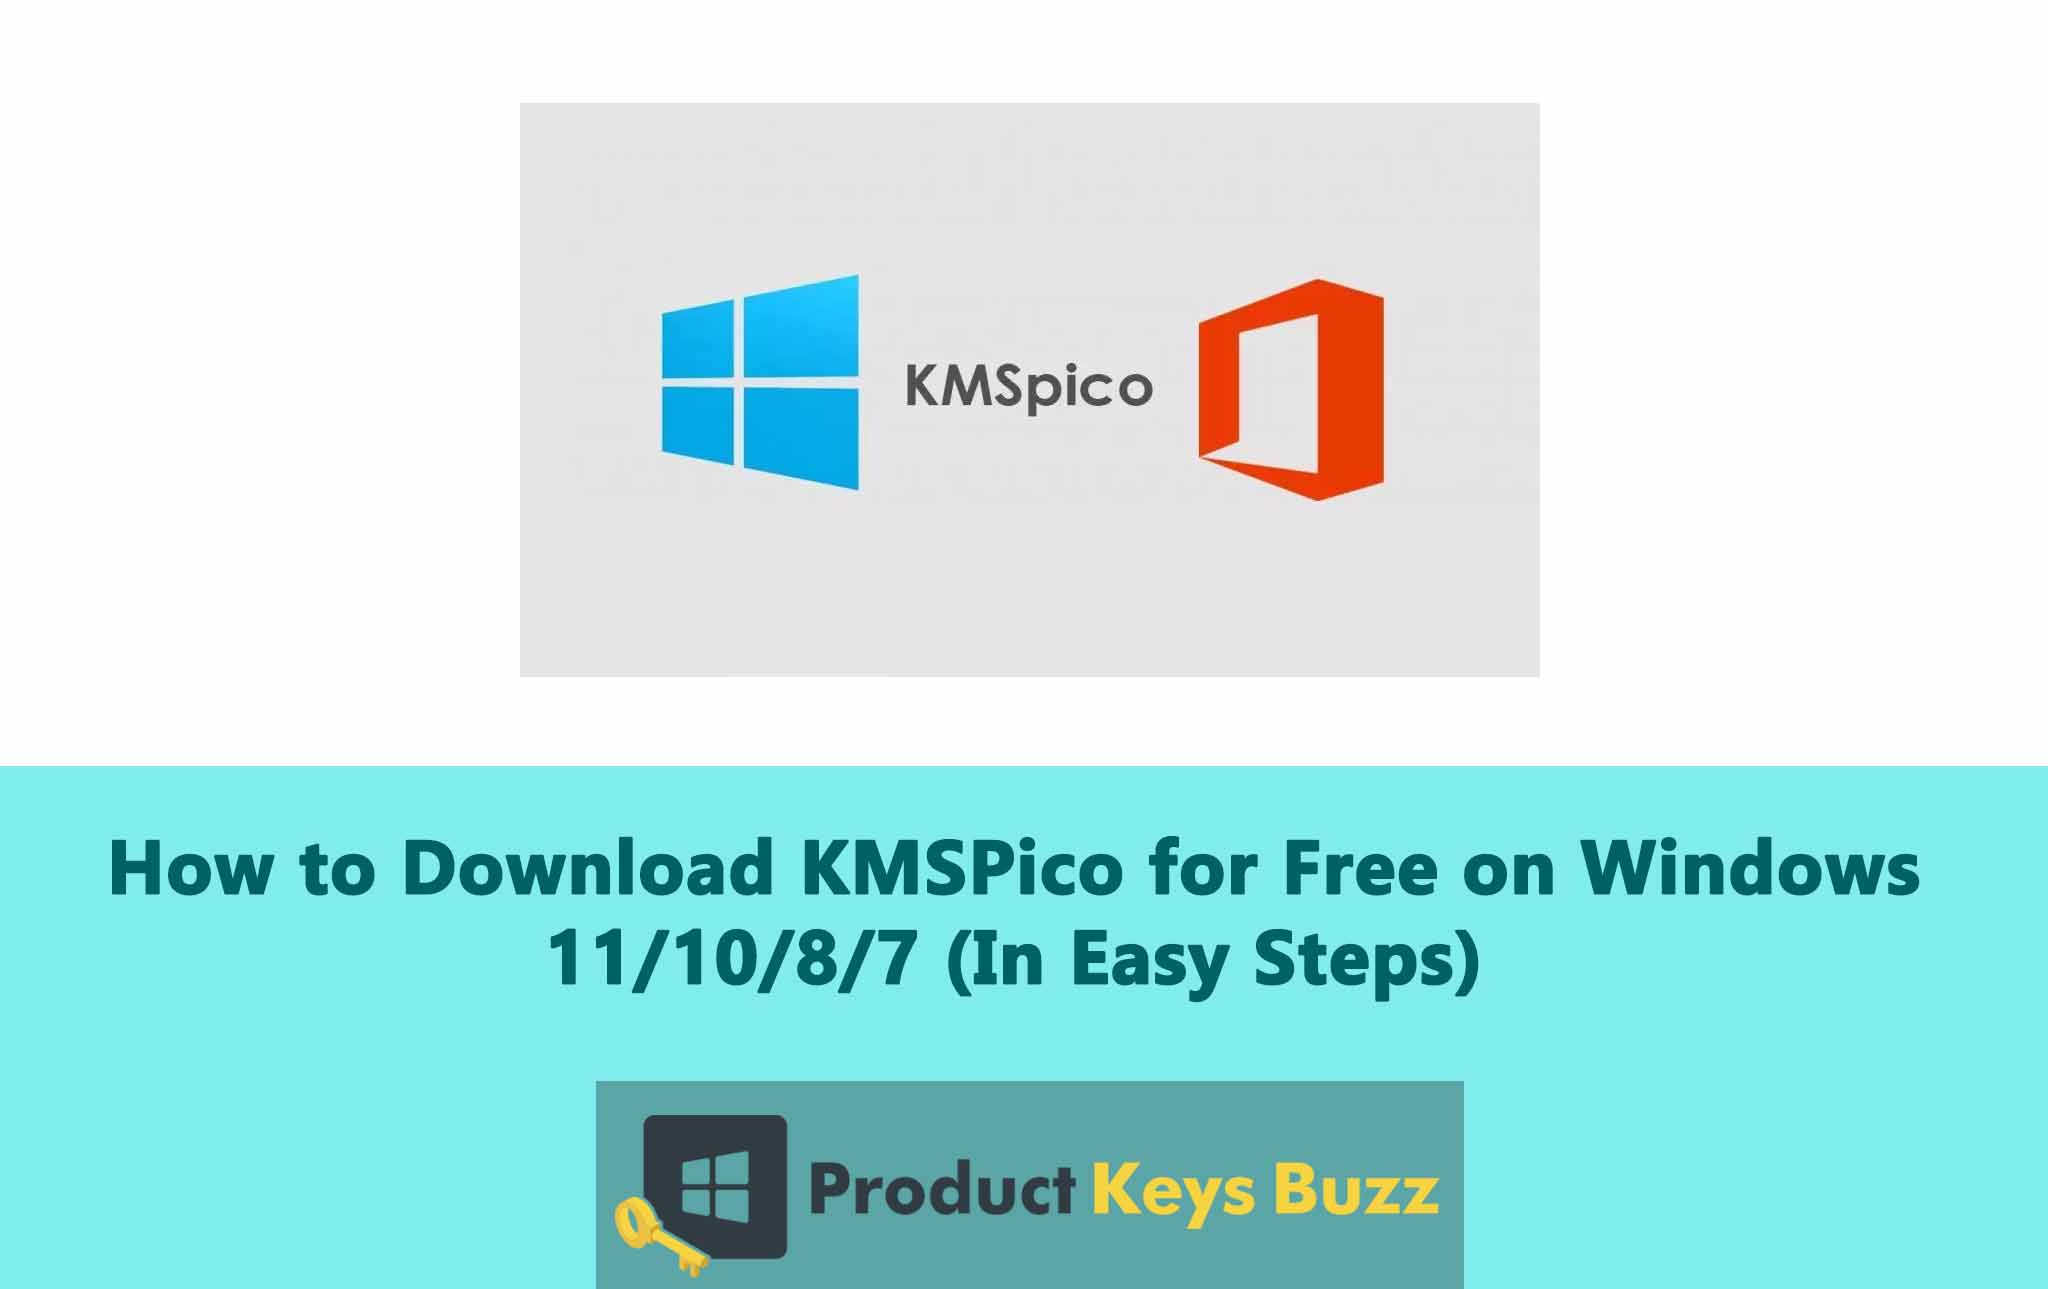 Download KMSPico for Free